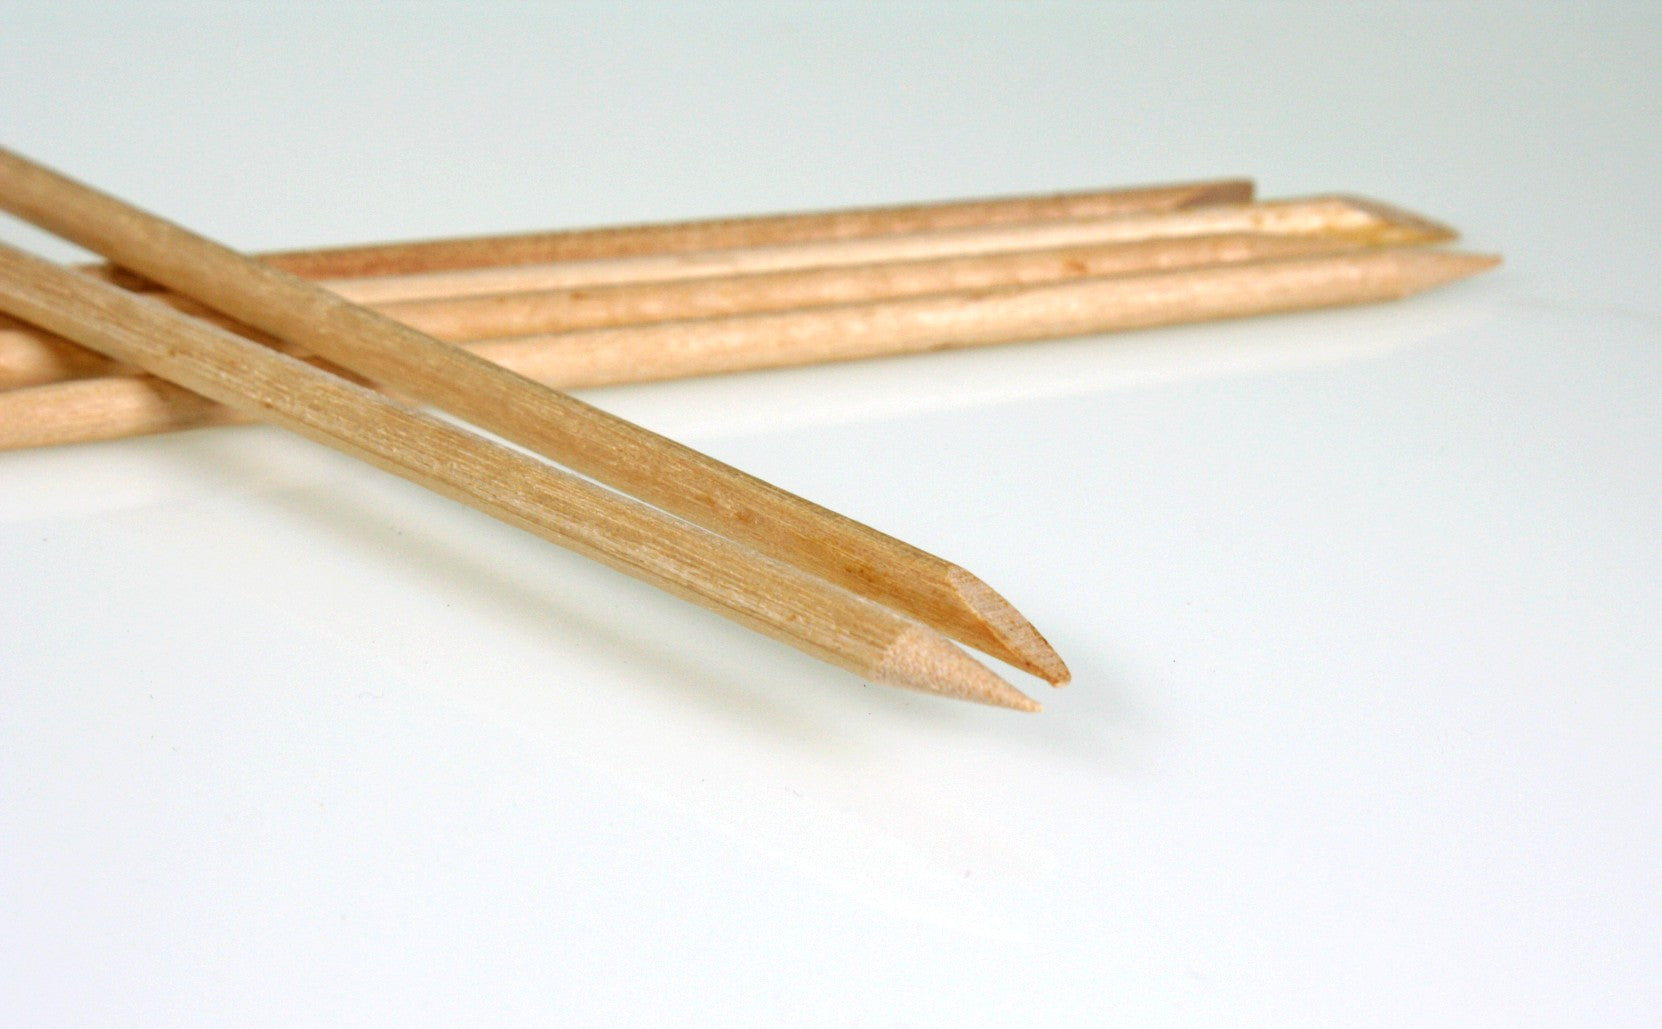 Close up of the ends of the sticks, showing each stick has one rounded and one pointy end.